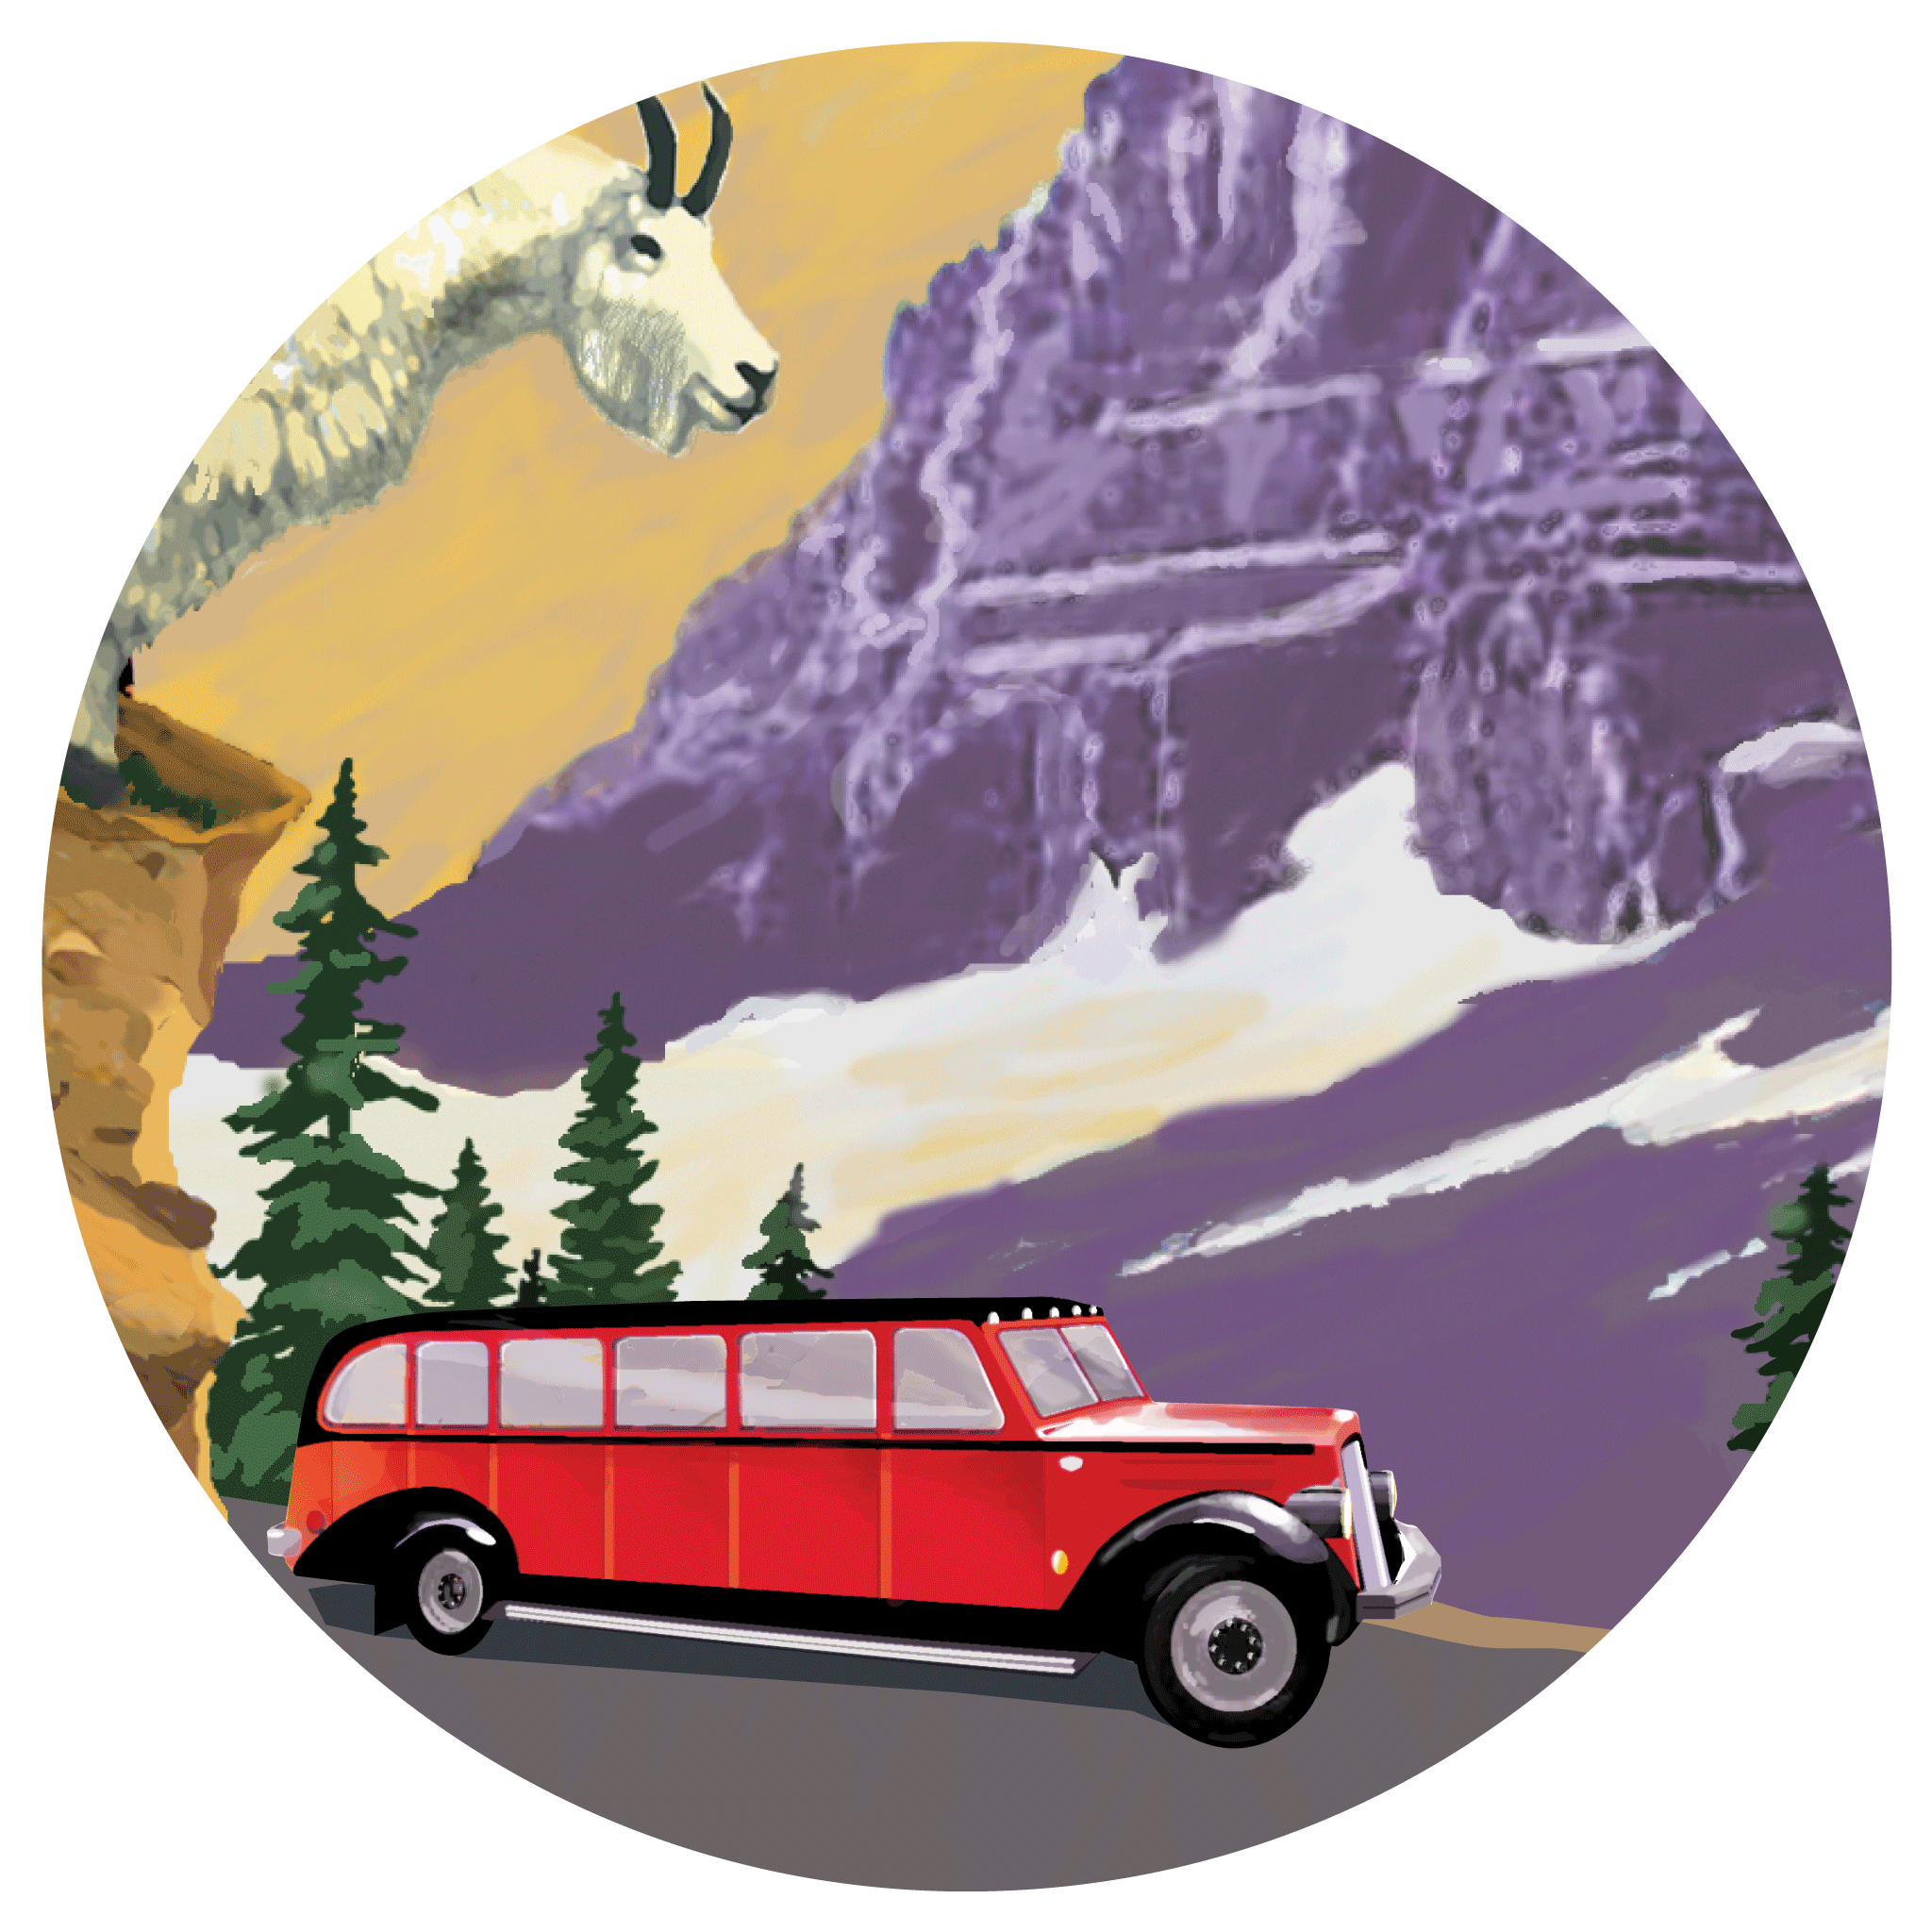 An illustration of a mountain goat overlooking a road with a passenger bus on it driving by a mountain